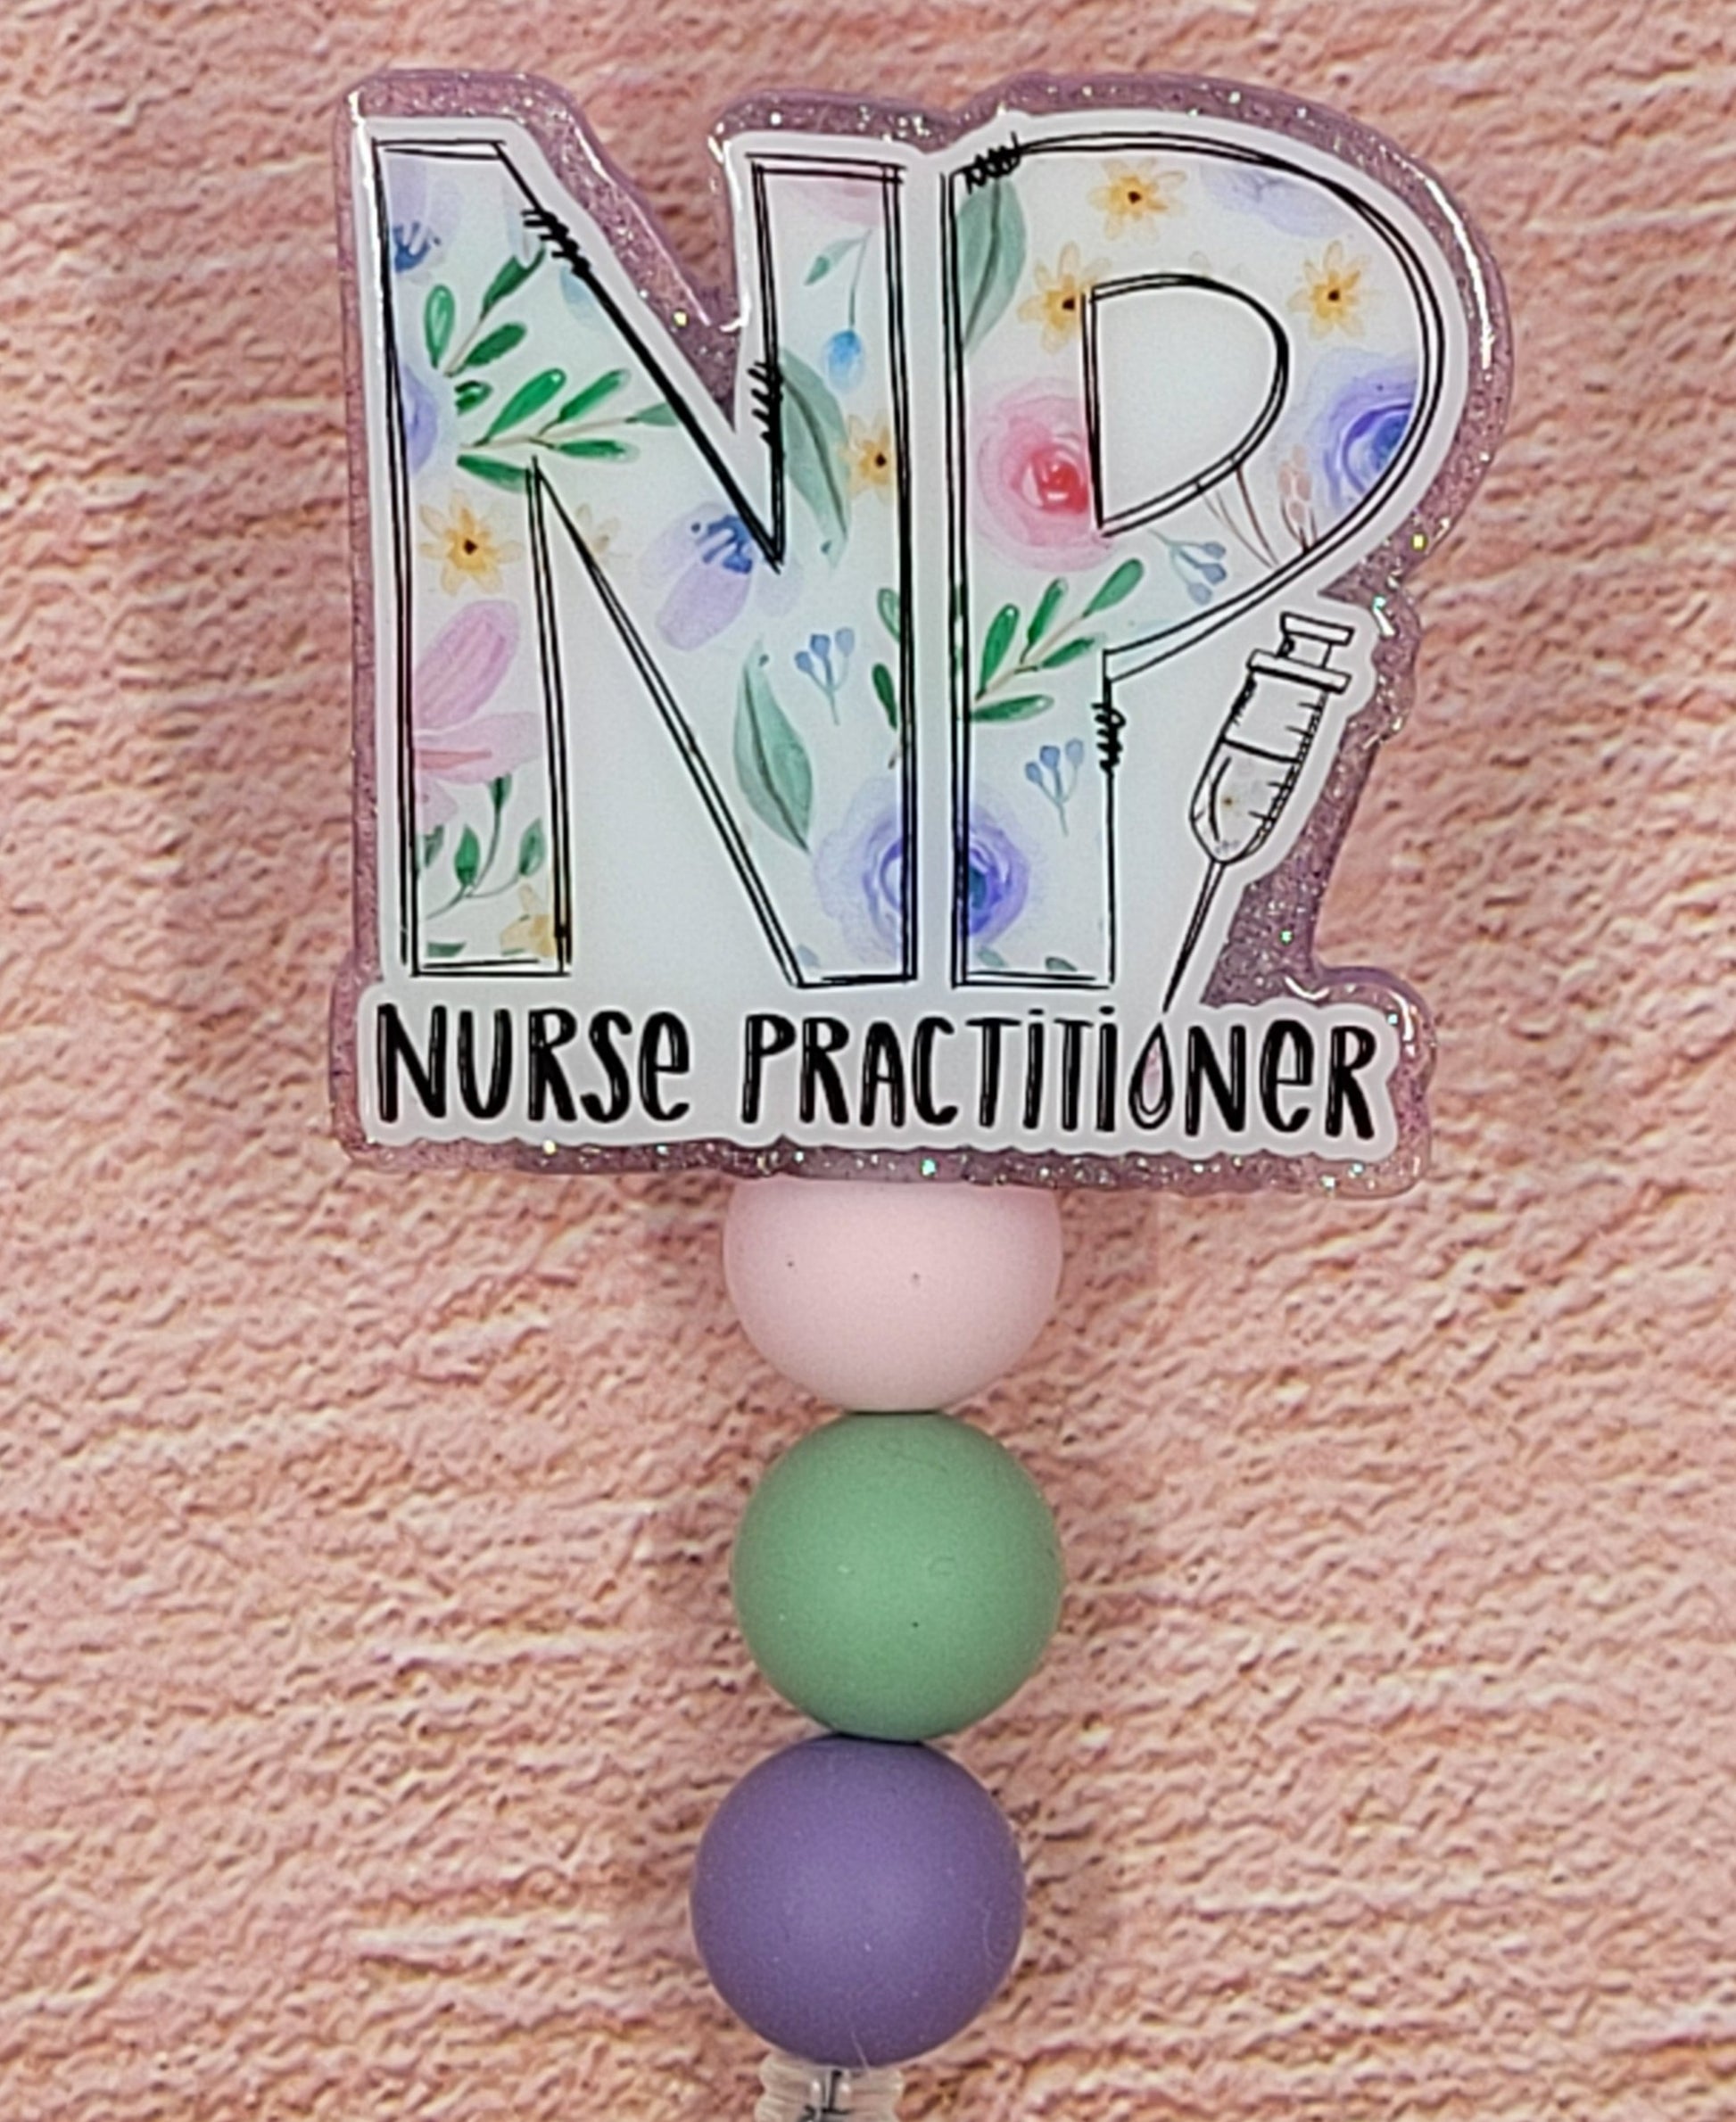 Introducing the new NP Badge Reel, part of our latest collection of Medical Badge Reels available now. Featuring Nurse Practitioner on the front and a purple glitter base adorned with coordinating beads, this Badge Reel is sure to catch the eye.